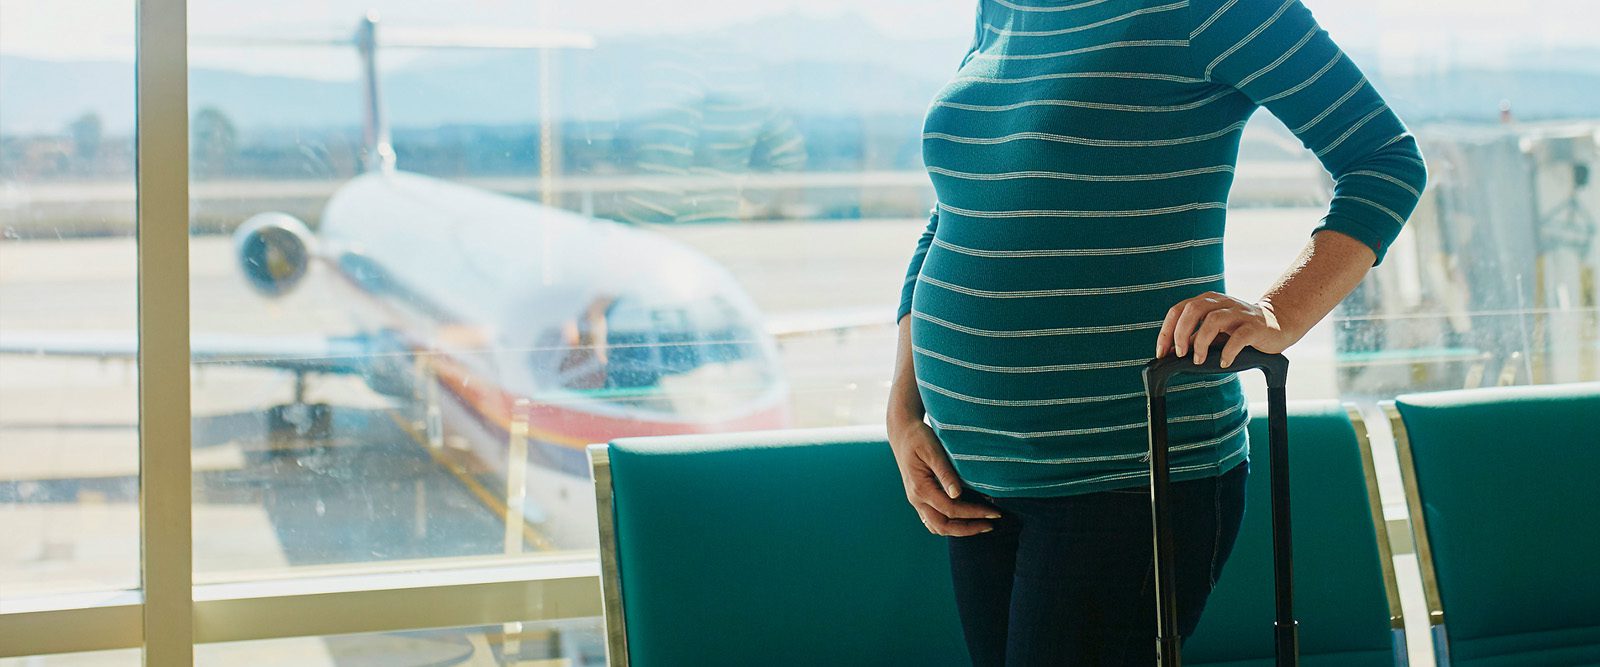 9 Tips for Traveling While Pregnant